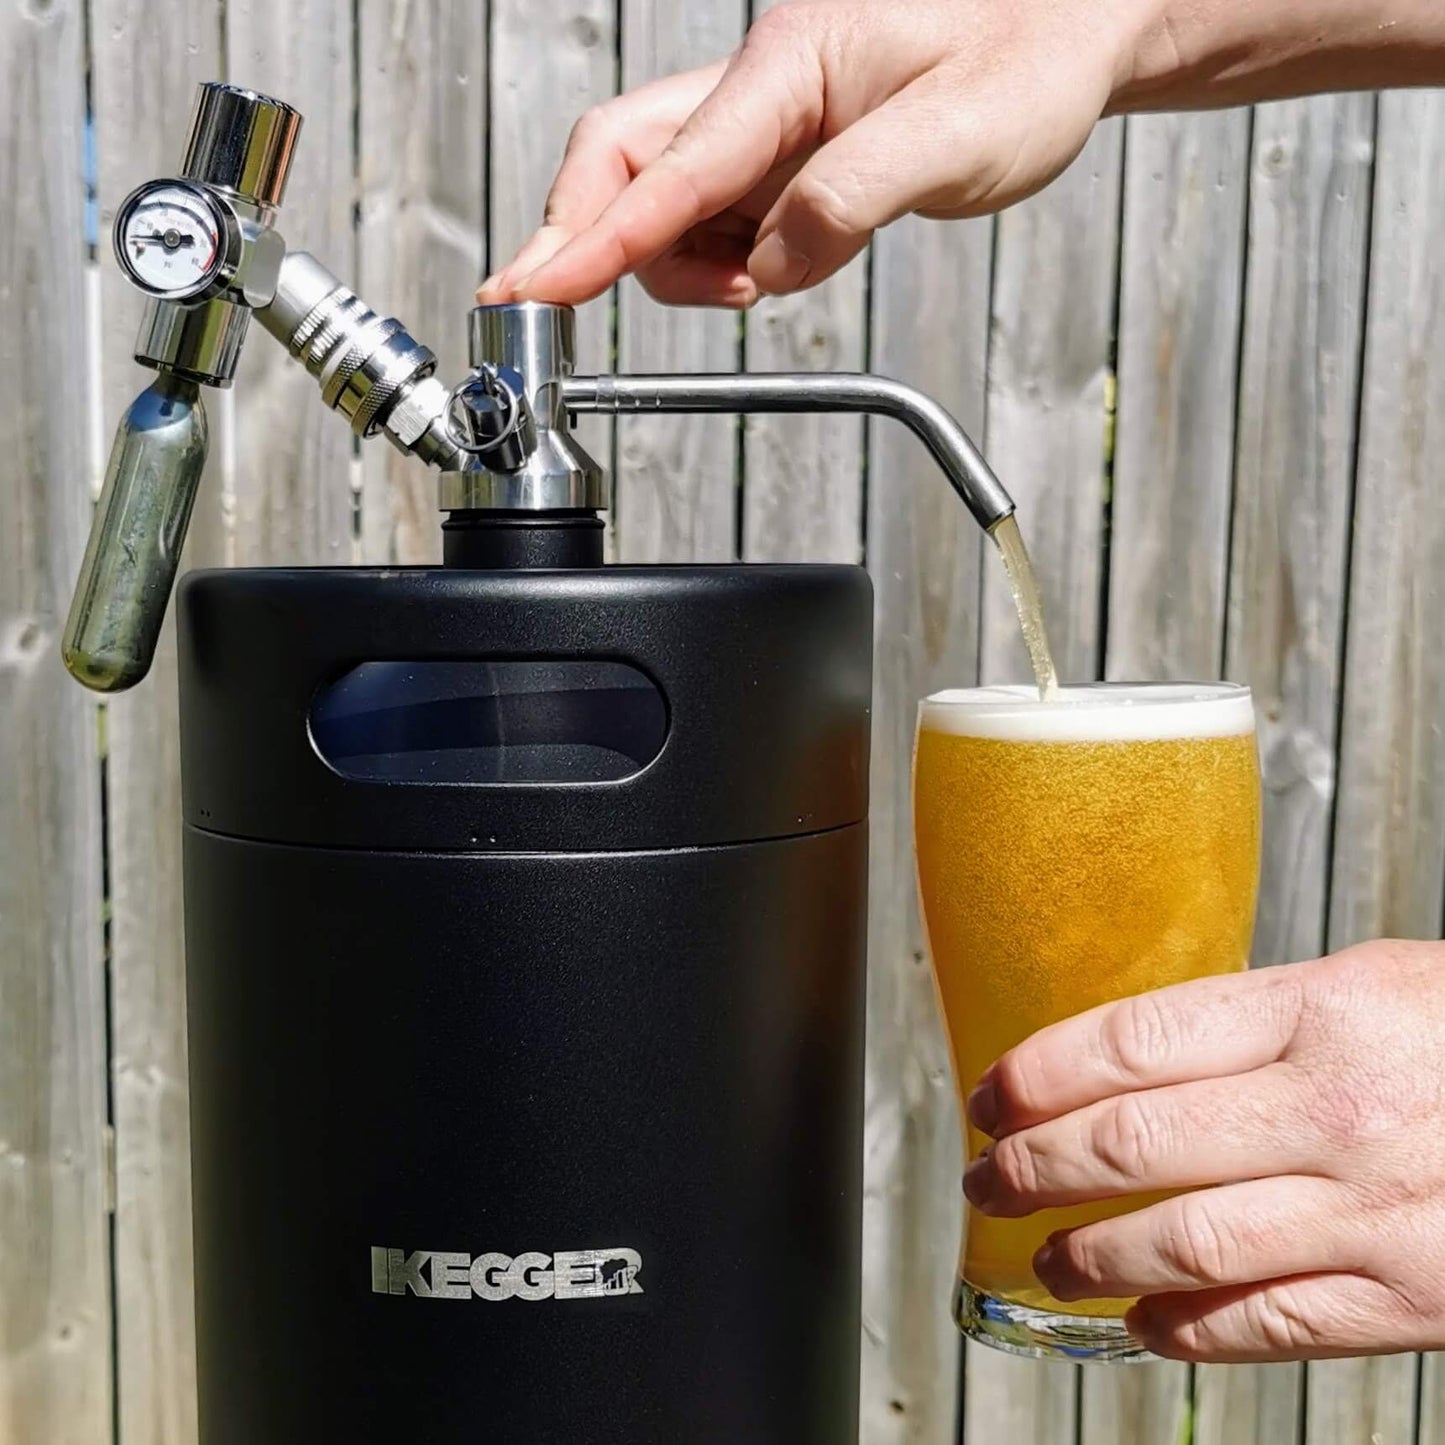 Complete "Any Drink" Mini Keg Bundle | Inc Gas & Accessories